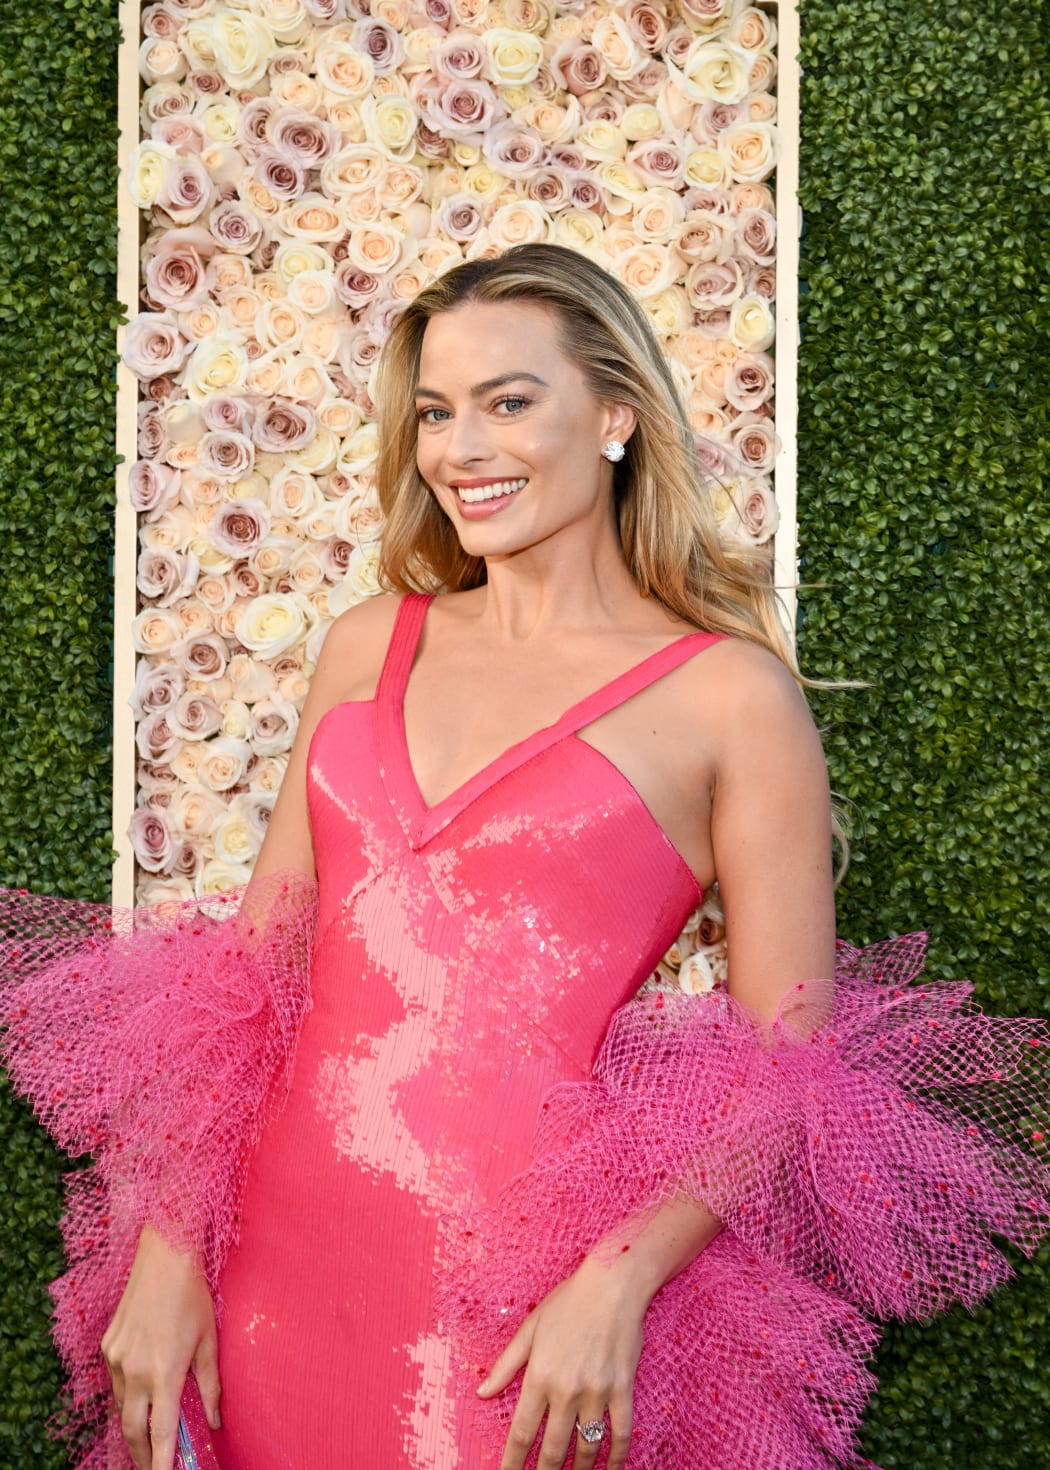 Margot Robbie at the 81st Golden Globe Awards held at the Beverly Hilton Hotel on January 7, 2024 in Beverly Hills, California. (Photo by Michael Buckner / Golden Globes / Golden Globes via AFP)